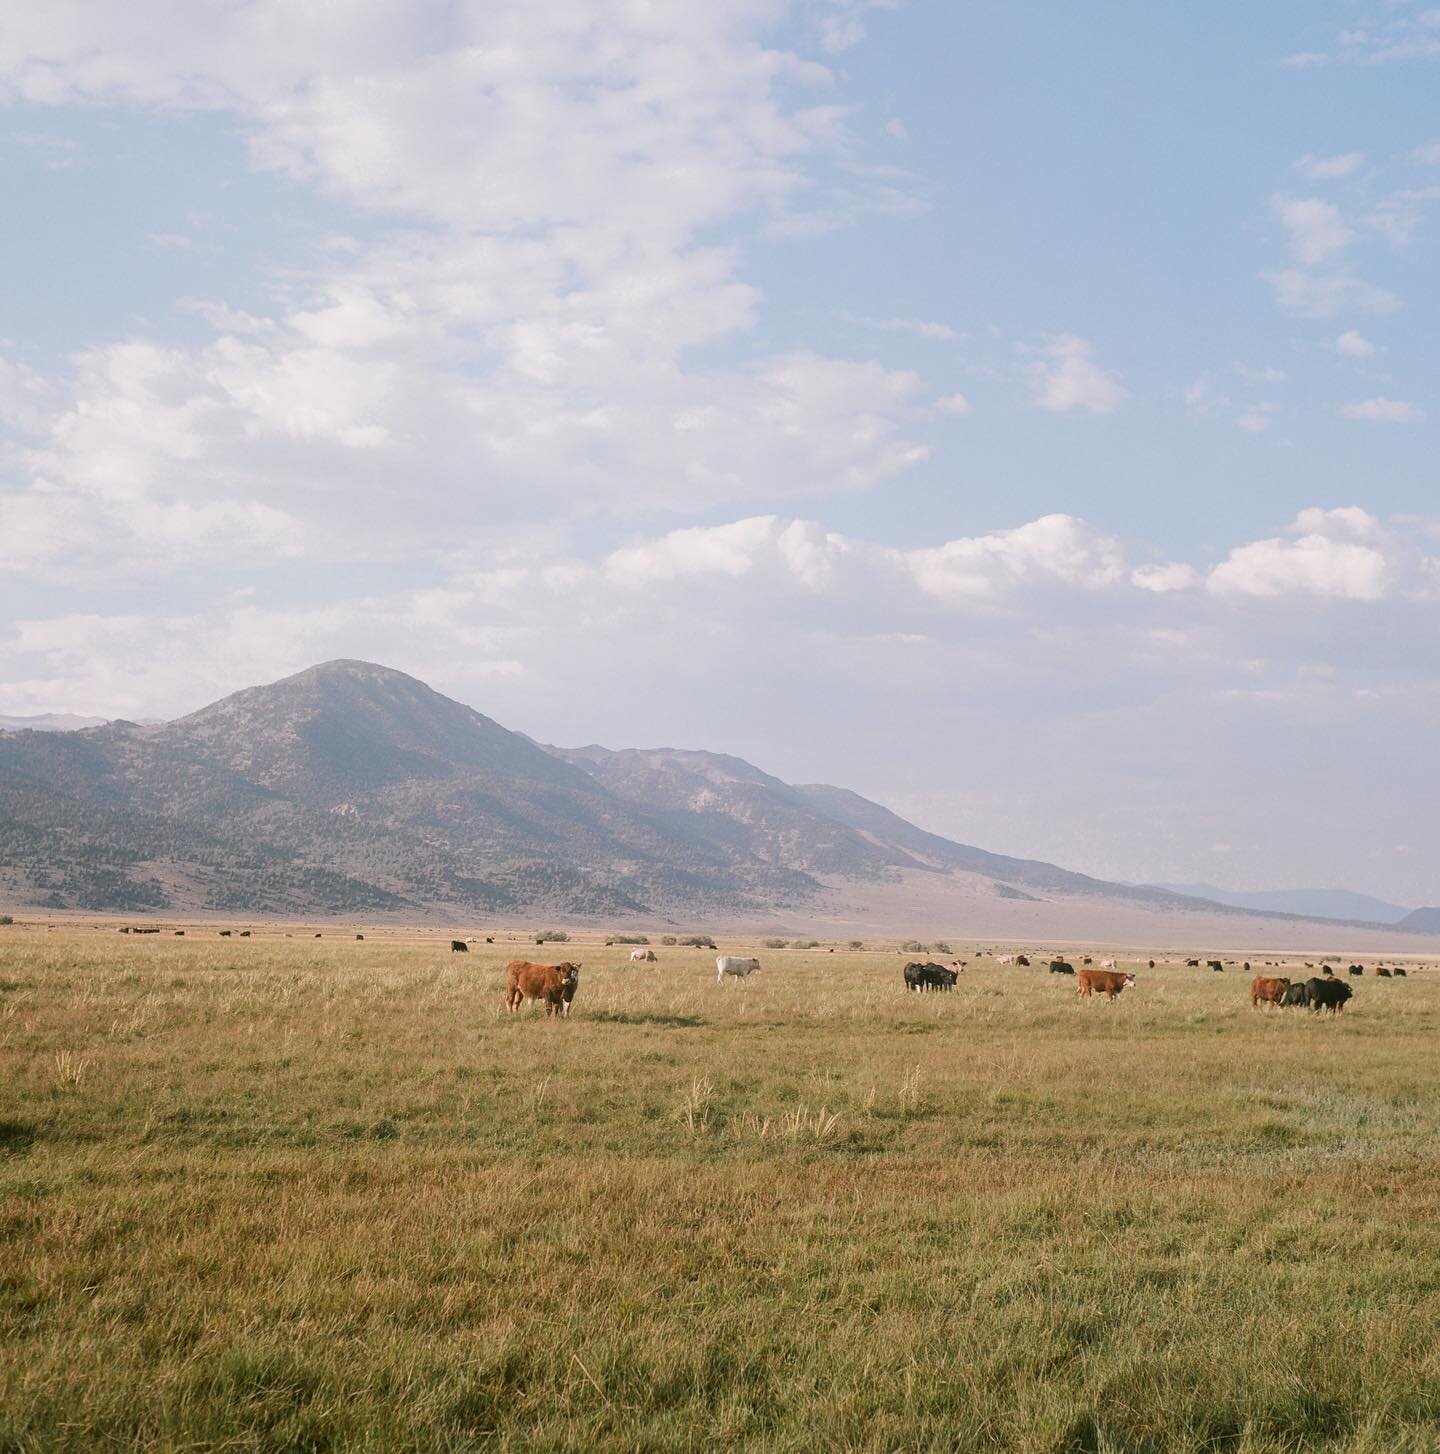 On road trips as a kid, I&rsquo;d get so excited when I saw cows. Not much has changed. #yashicamat124g #120film